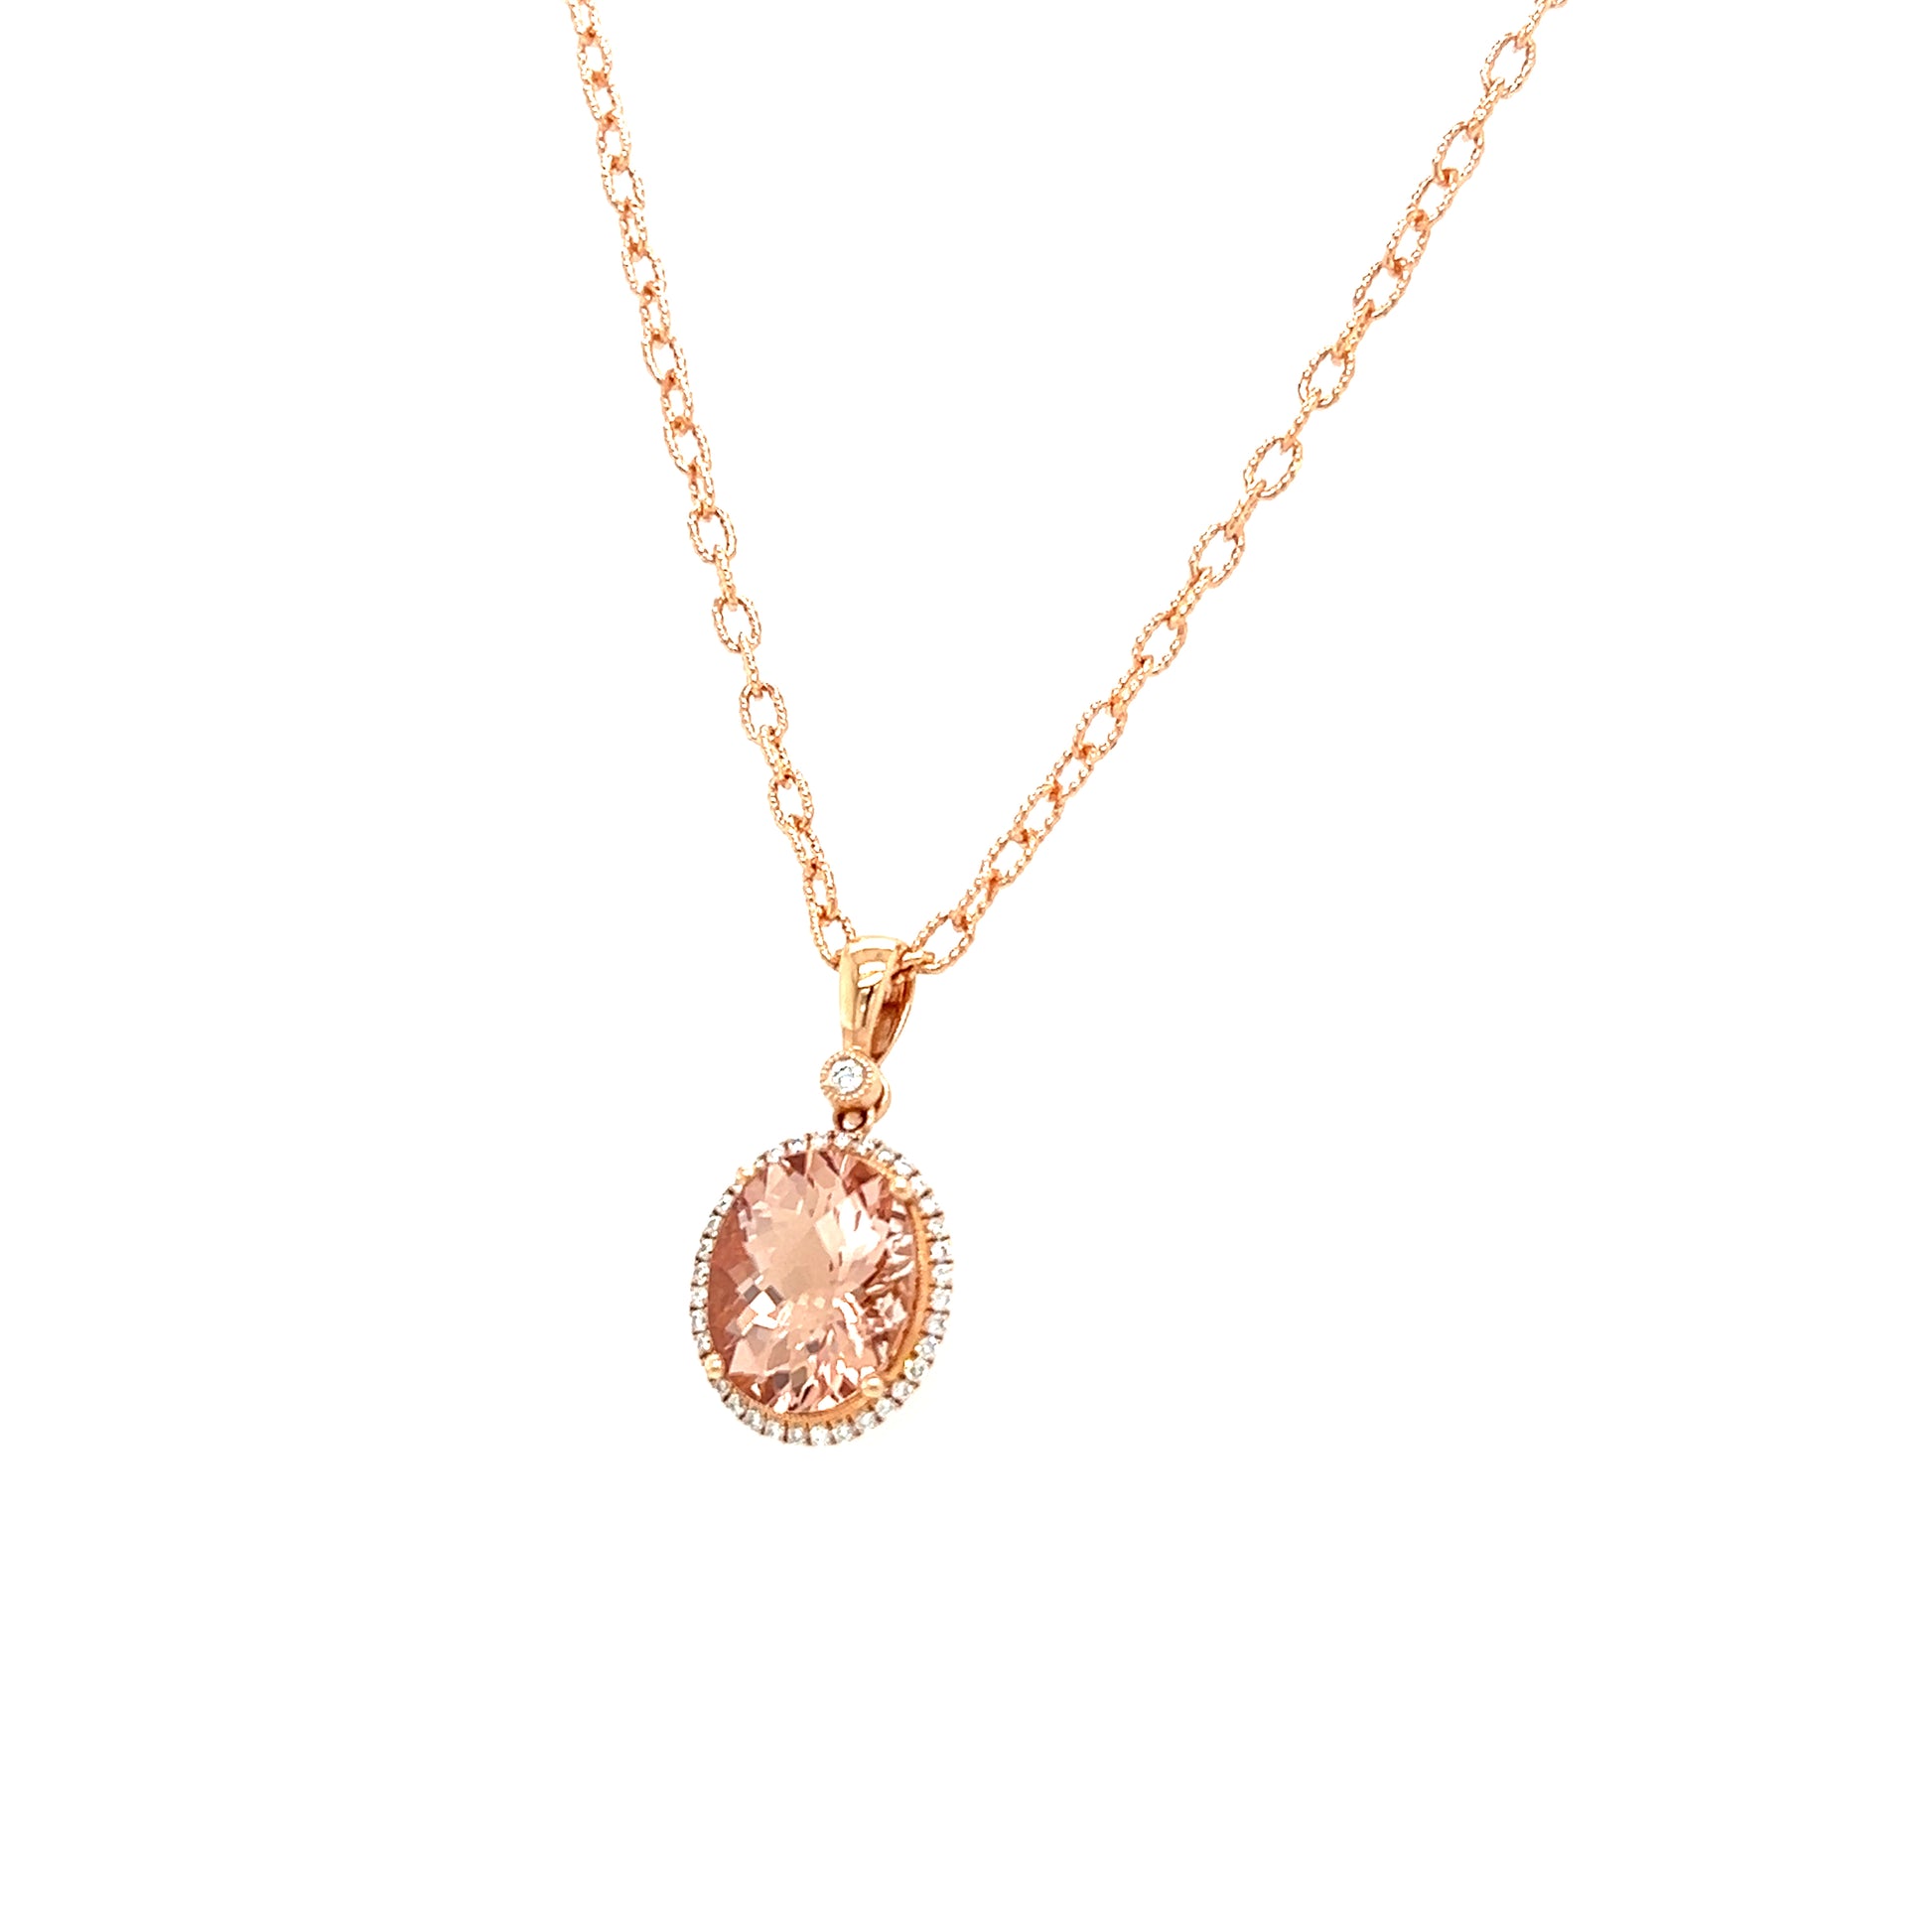 Oval Morganite Necklace with Diamond Halo in 14K Rose Gold. Right Side View